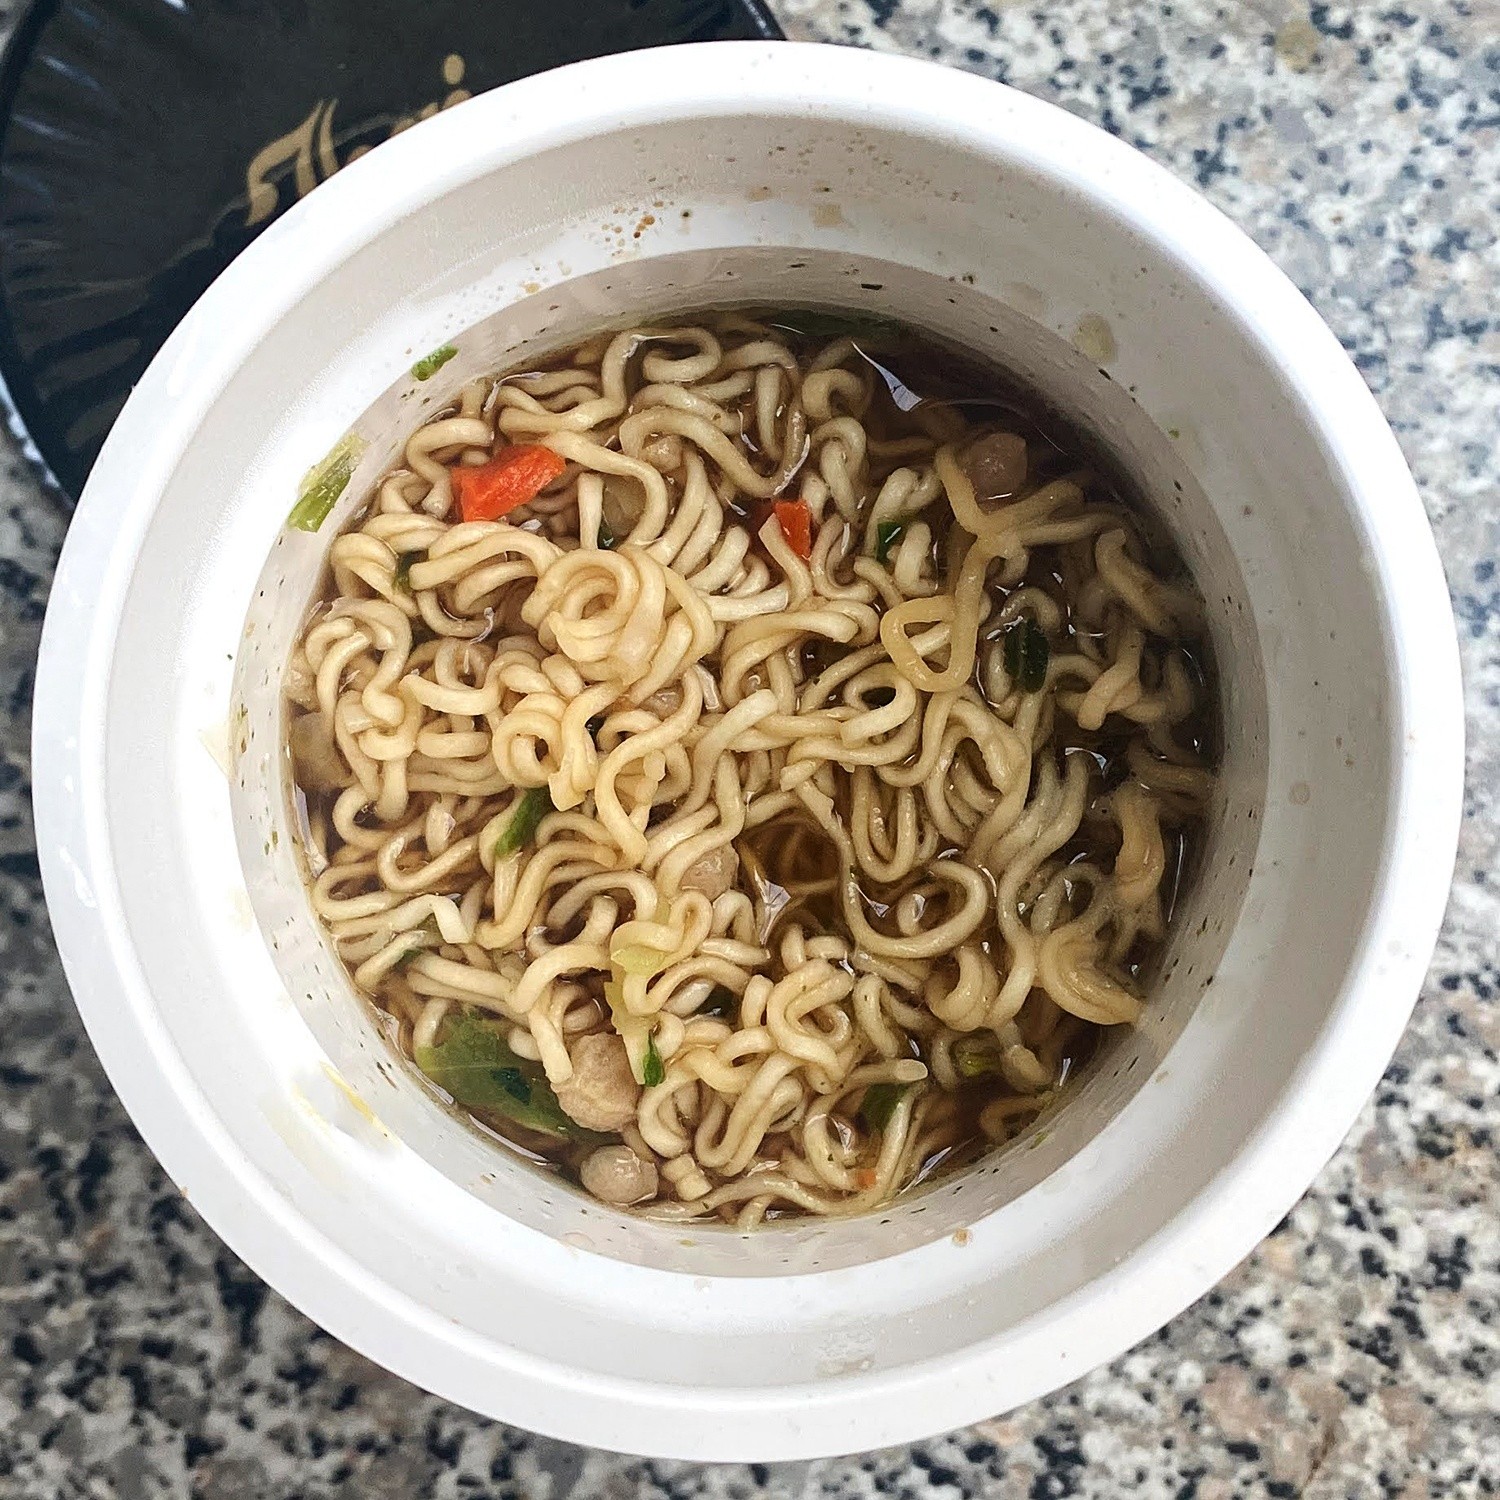 #1889: Thai Chef "Typ Rind Instant Nudelsuppe" Cup (Update 2022)